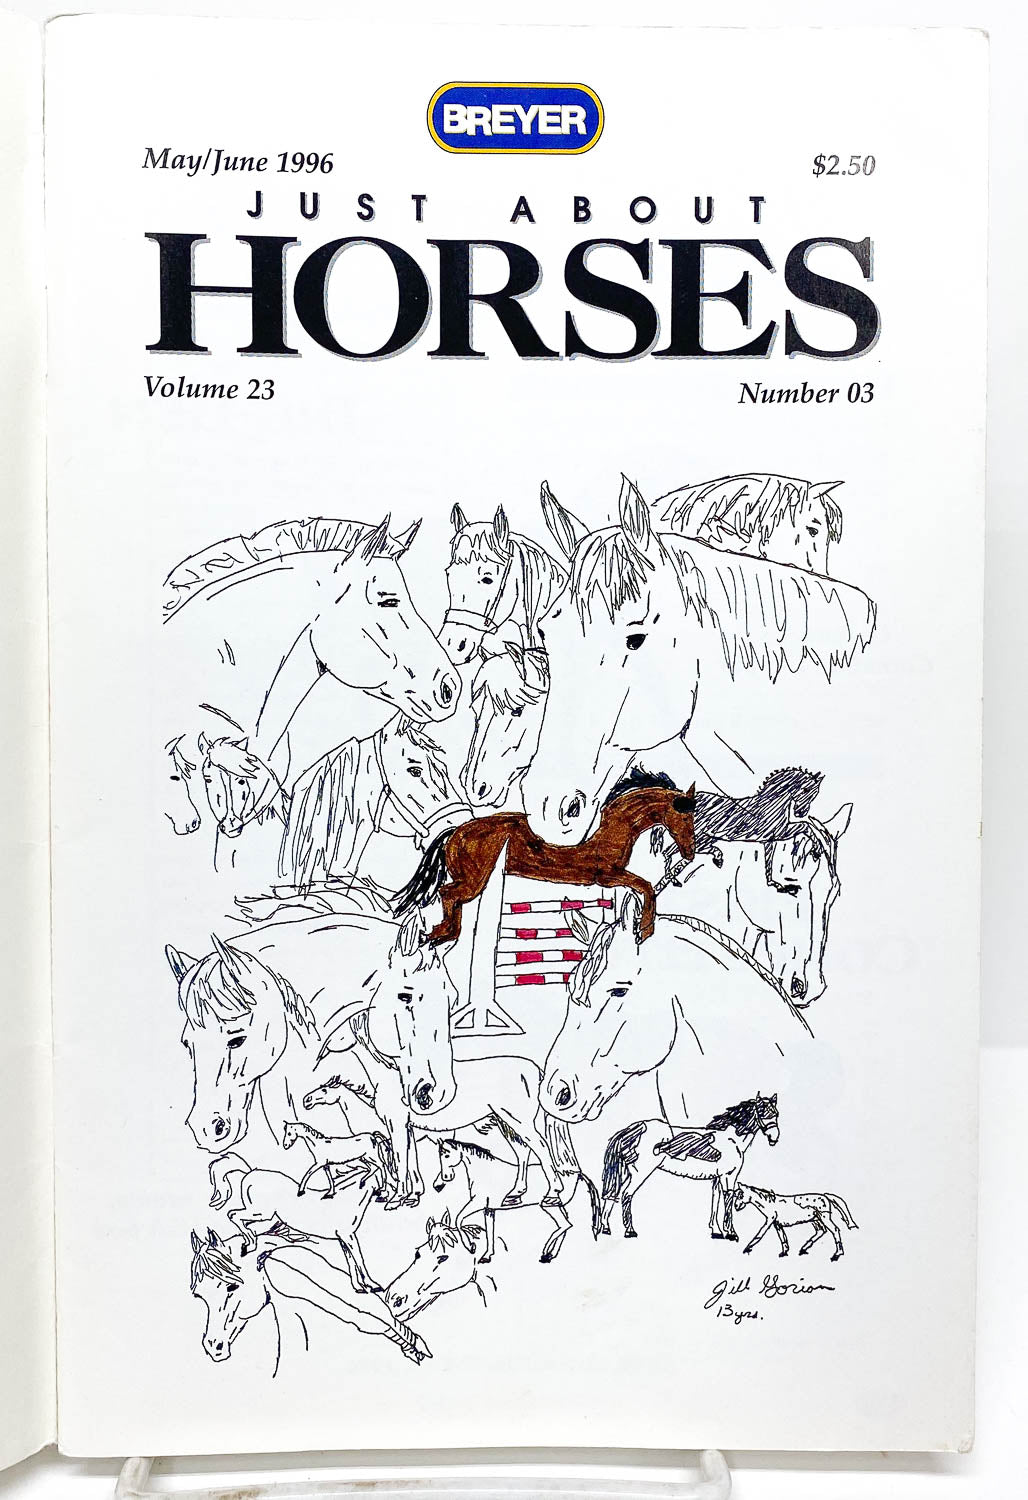 Just About Horses Magazine Vol. 23 No. 3, 1996 May/June